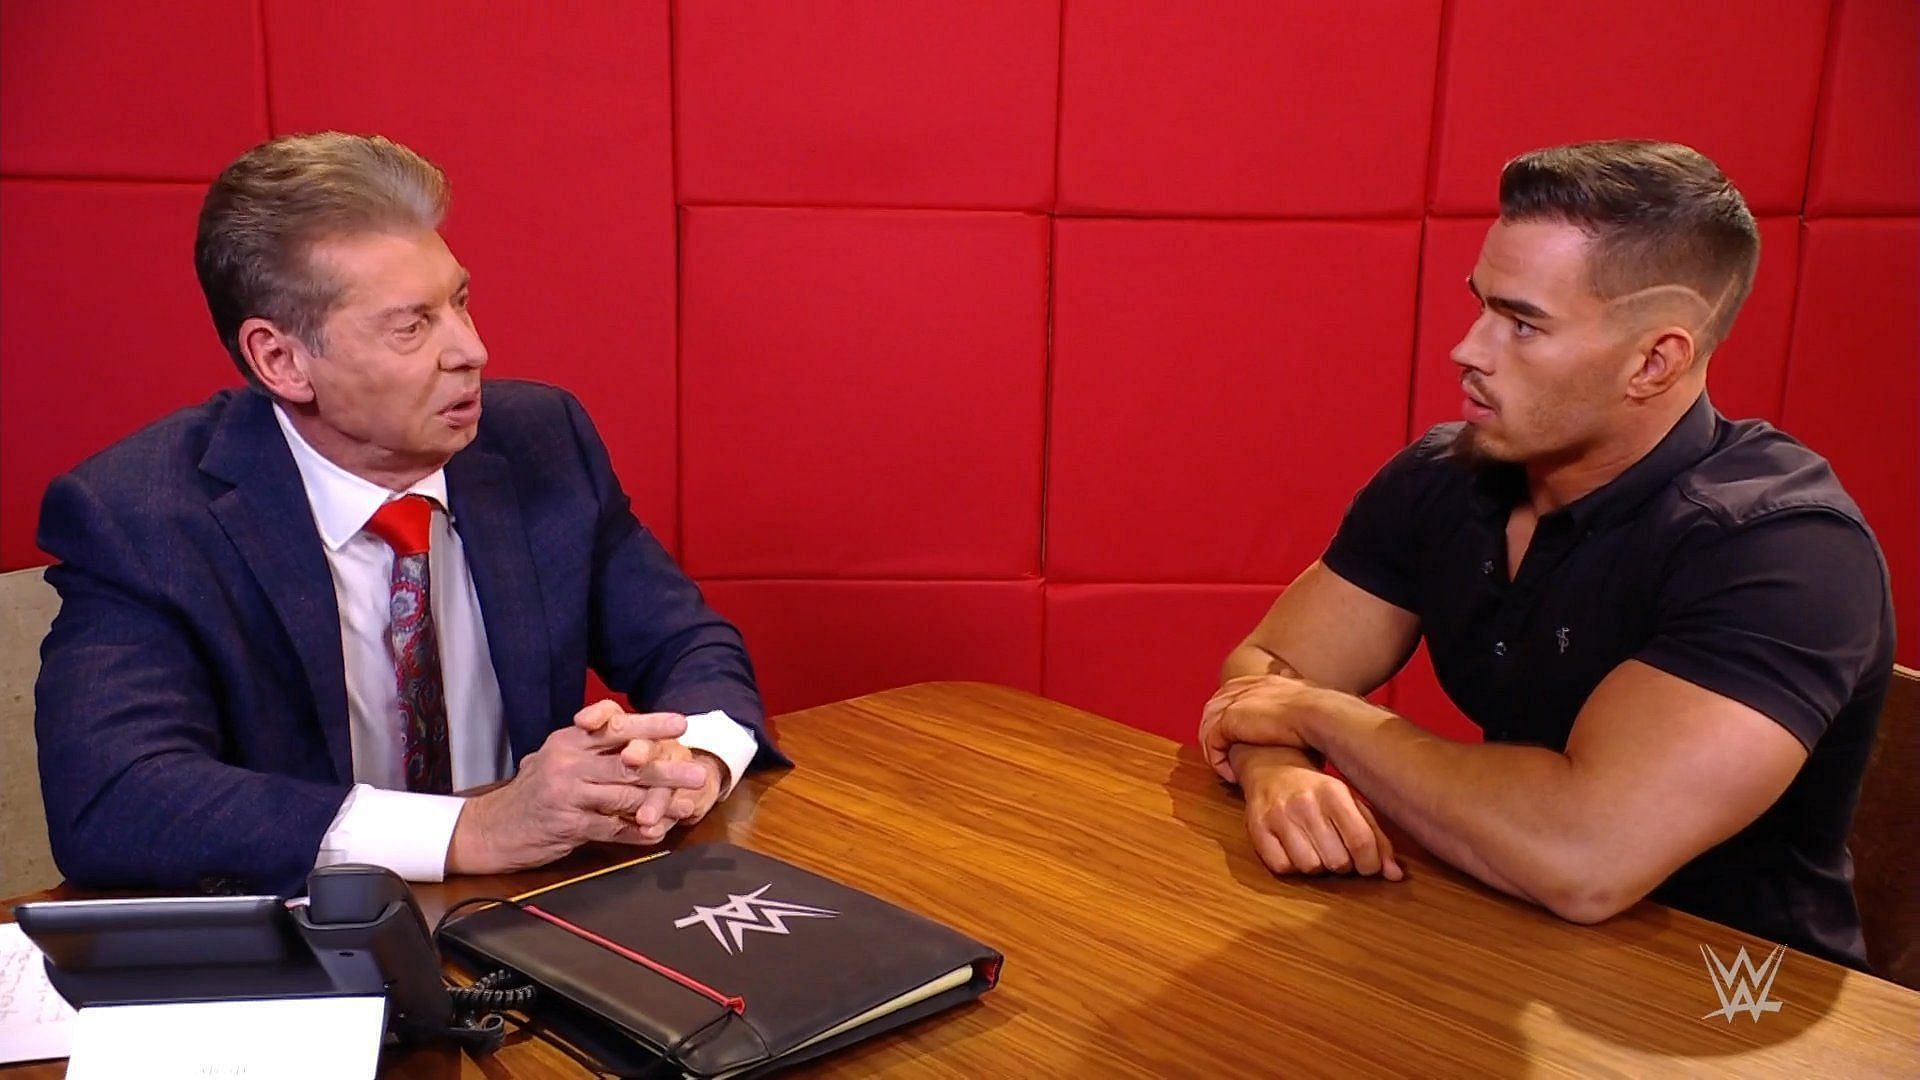 Vince McMahon having a serious discussion with Austin Theory on WWE programming